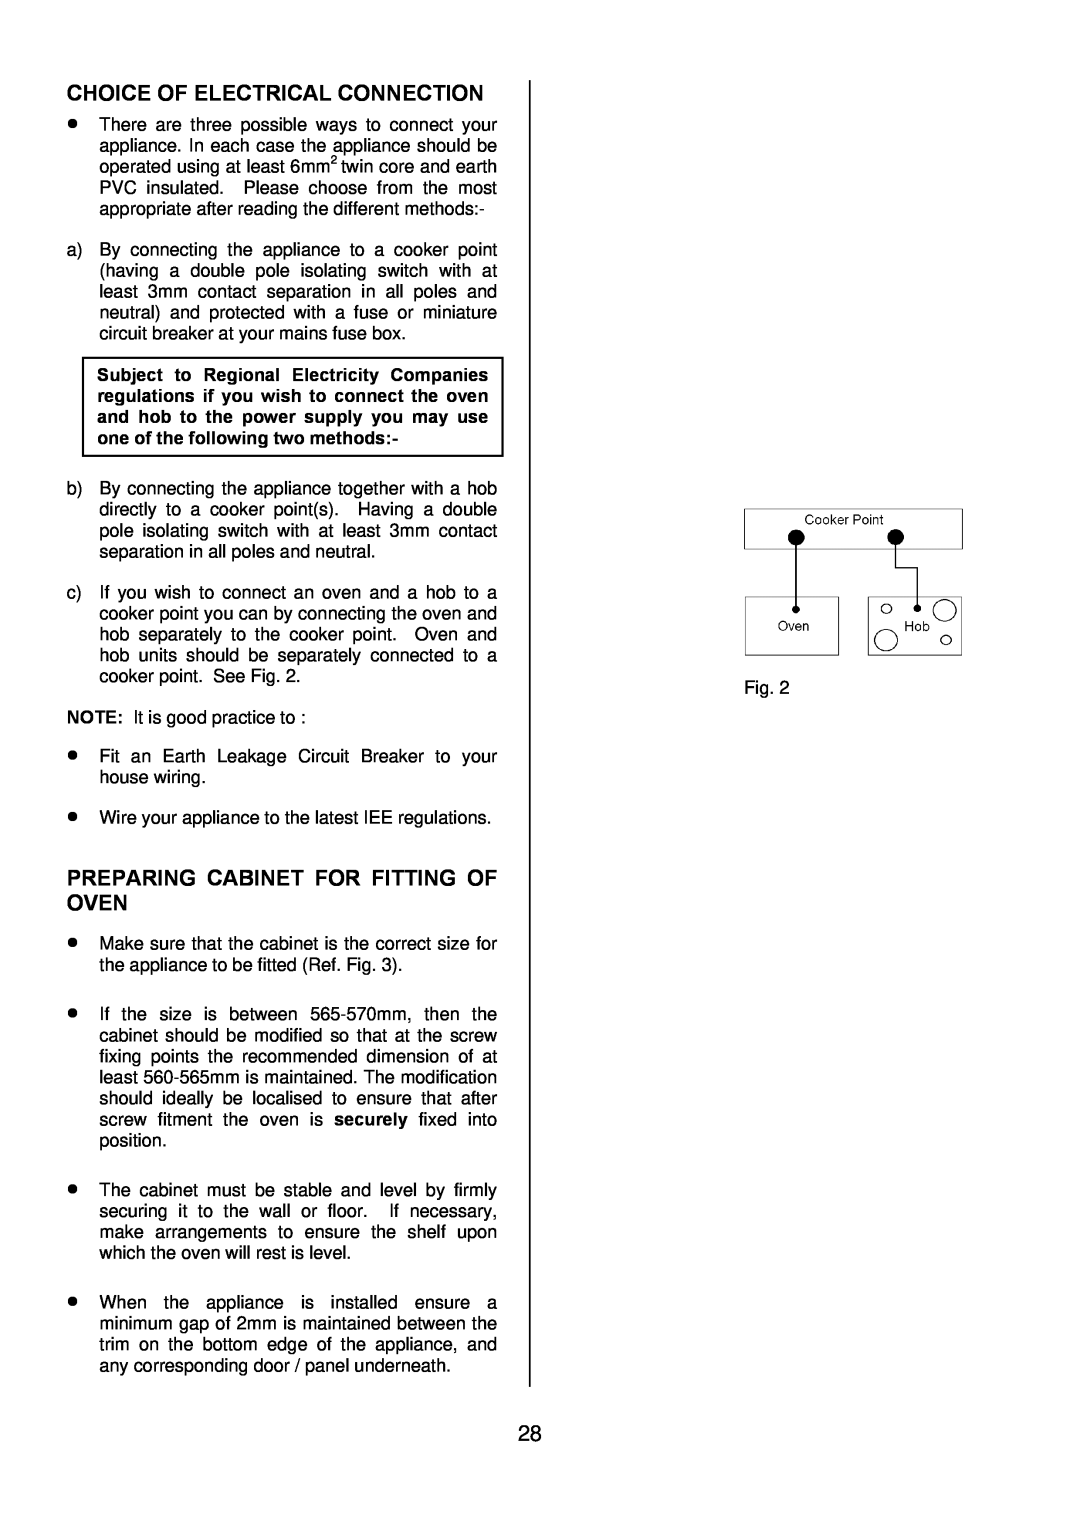 Tricity Bendix TBD950 installation instructions Choice Of Electrical Connection, Preparing Cabinet For Fitting Of Oven 